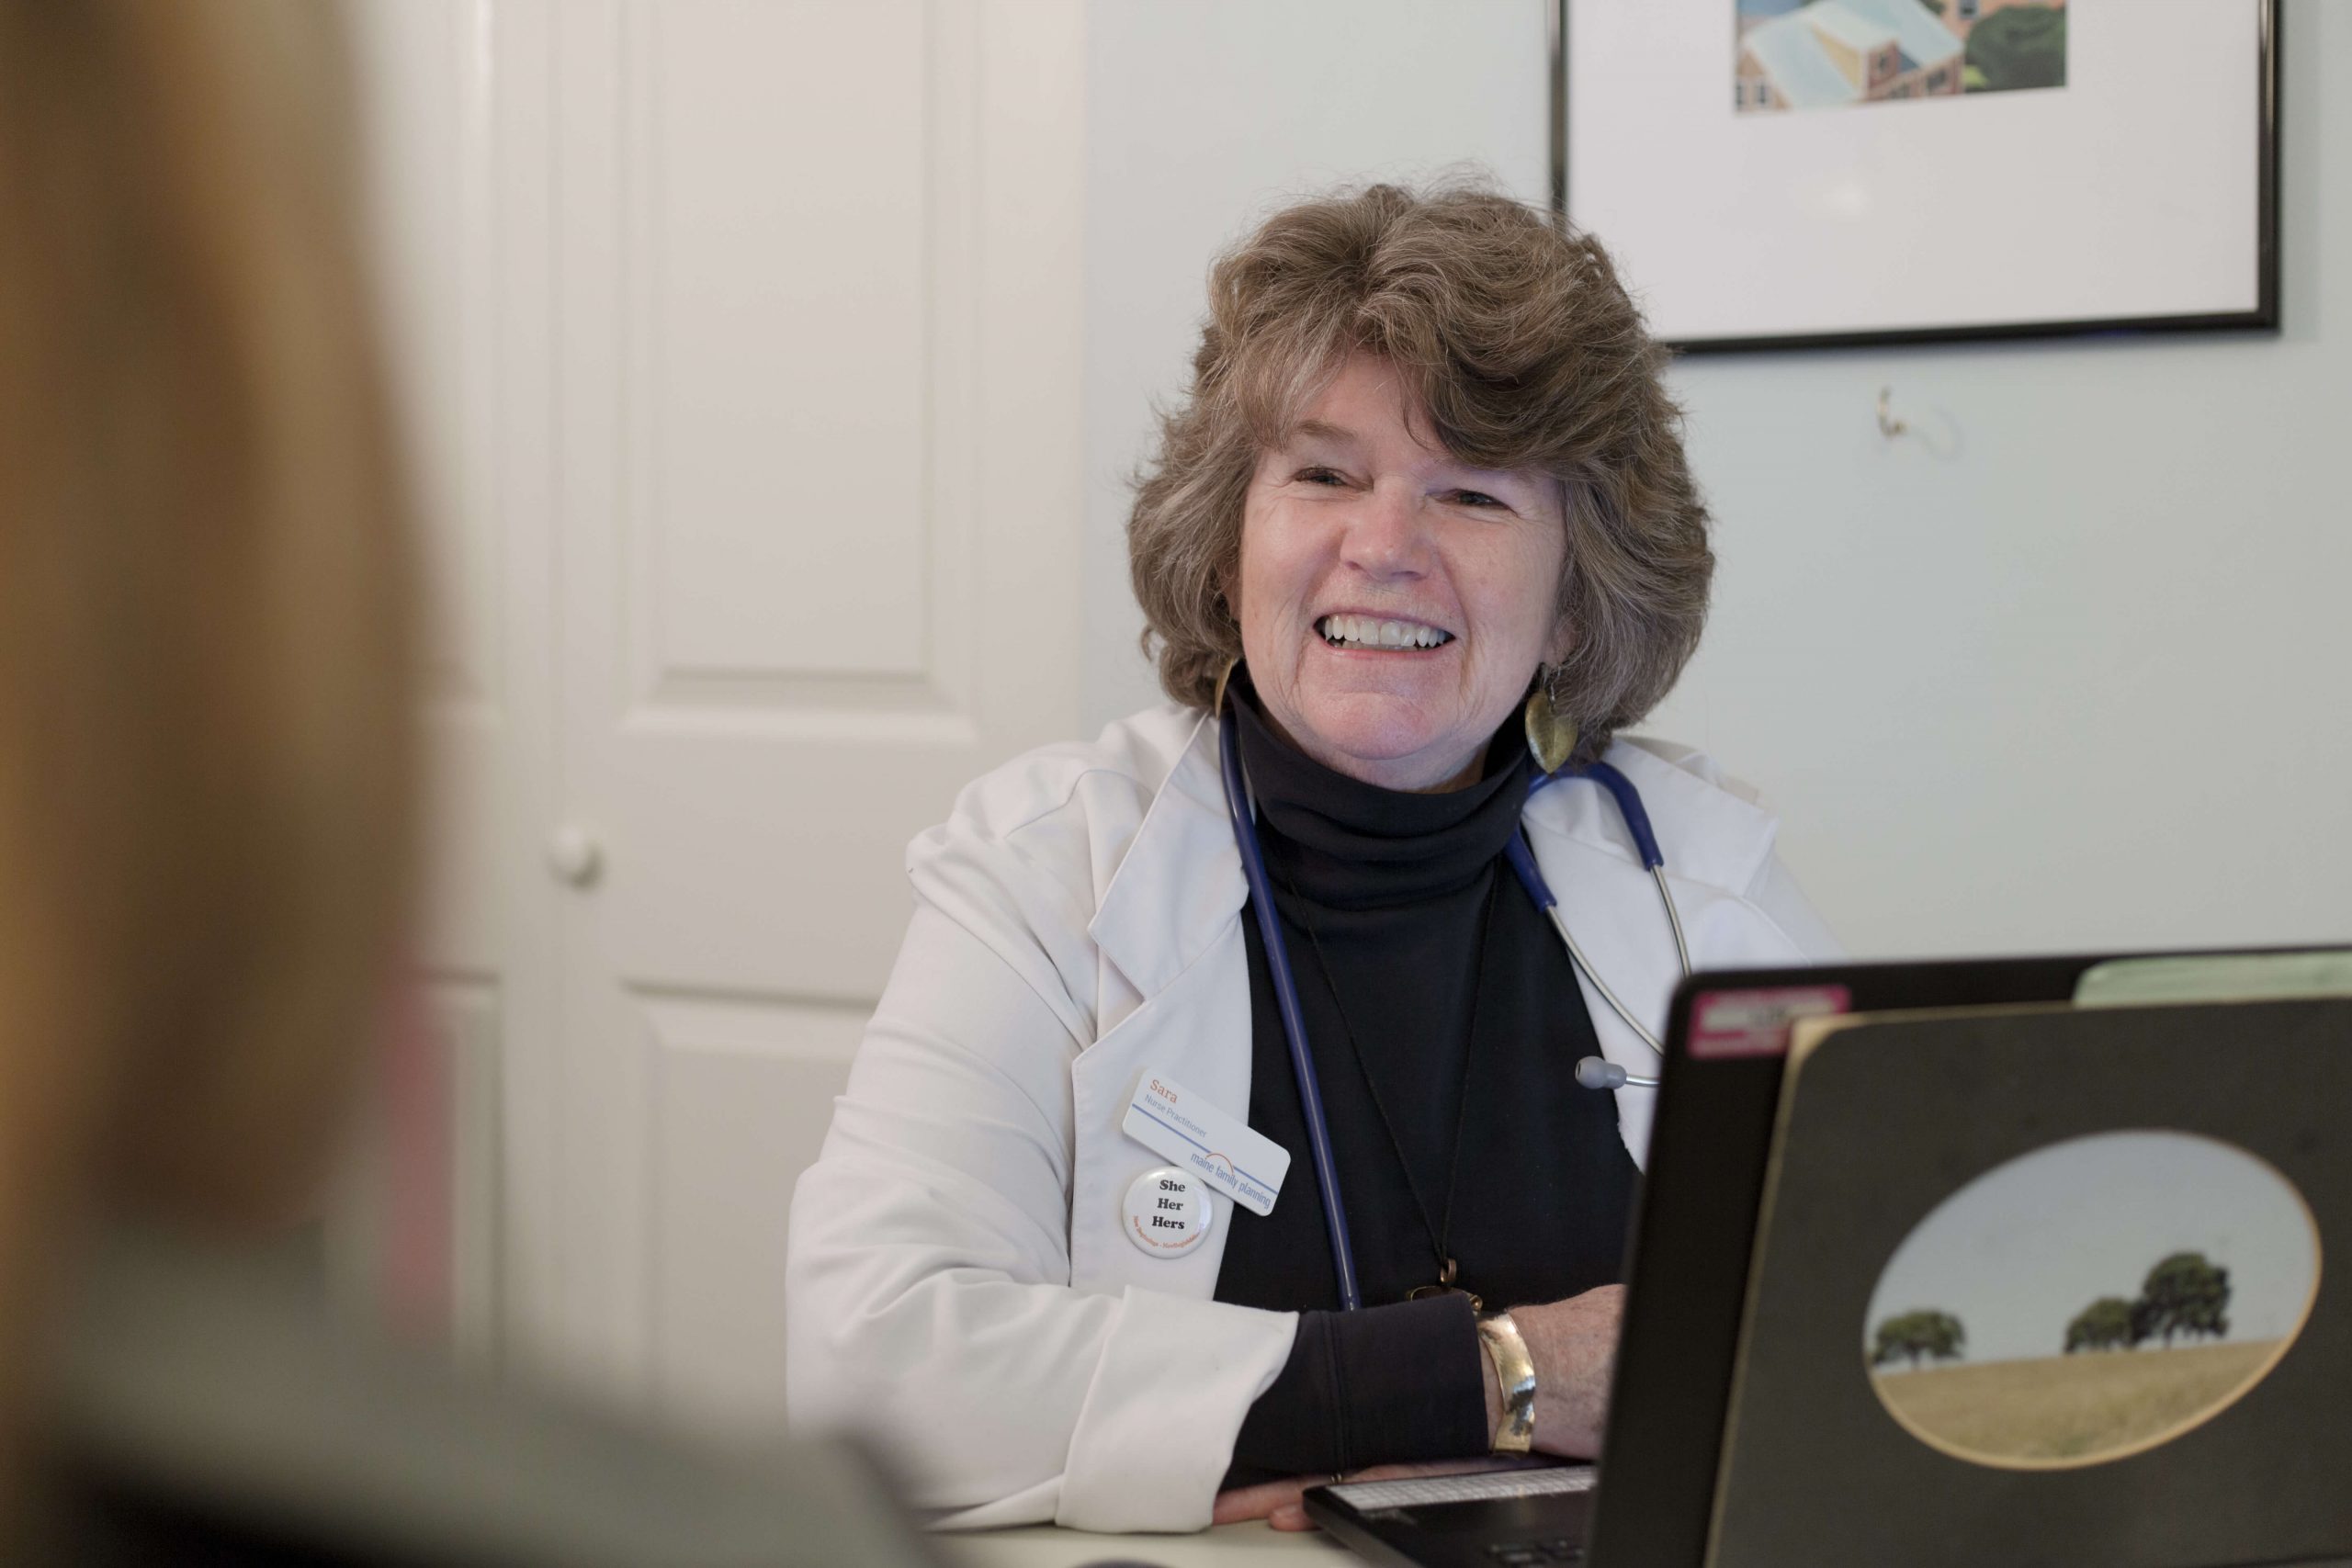 An MFP nurse practitioner sitting in front of an open laptop used for telehealth appointments.